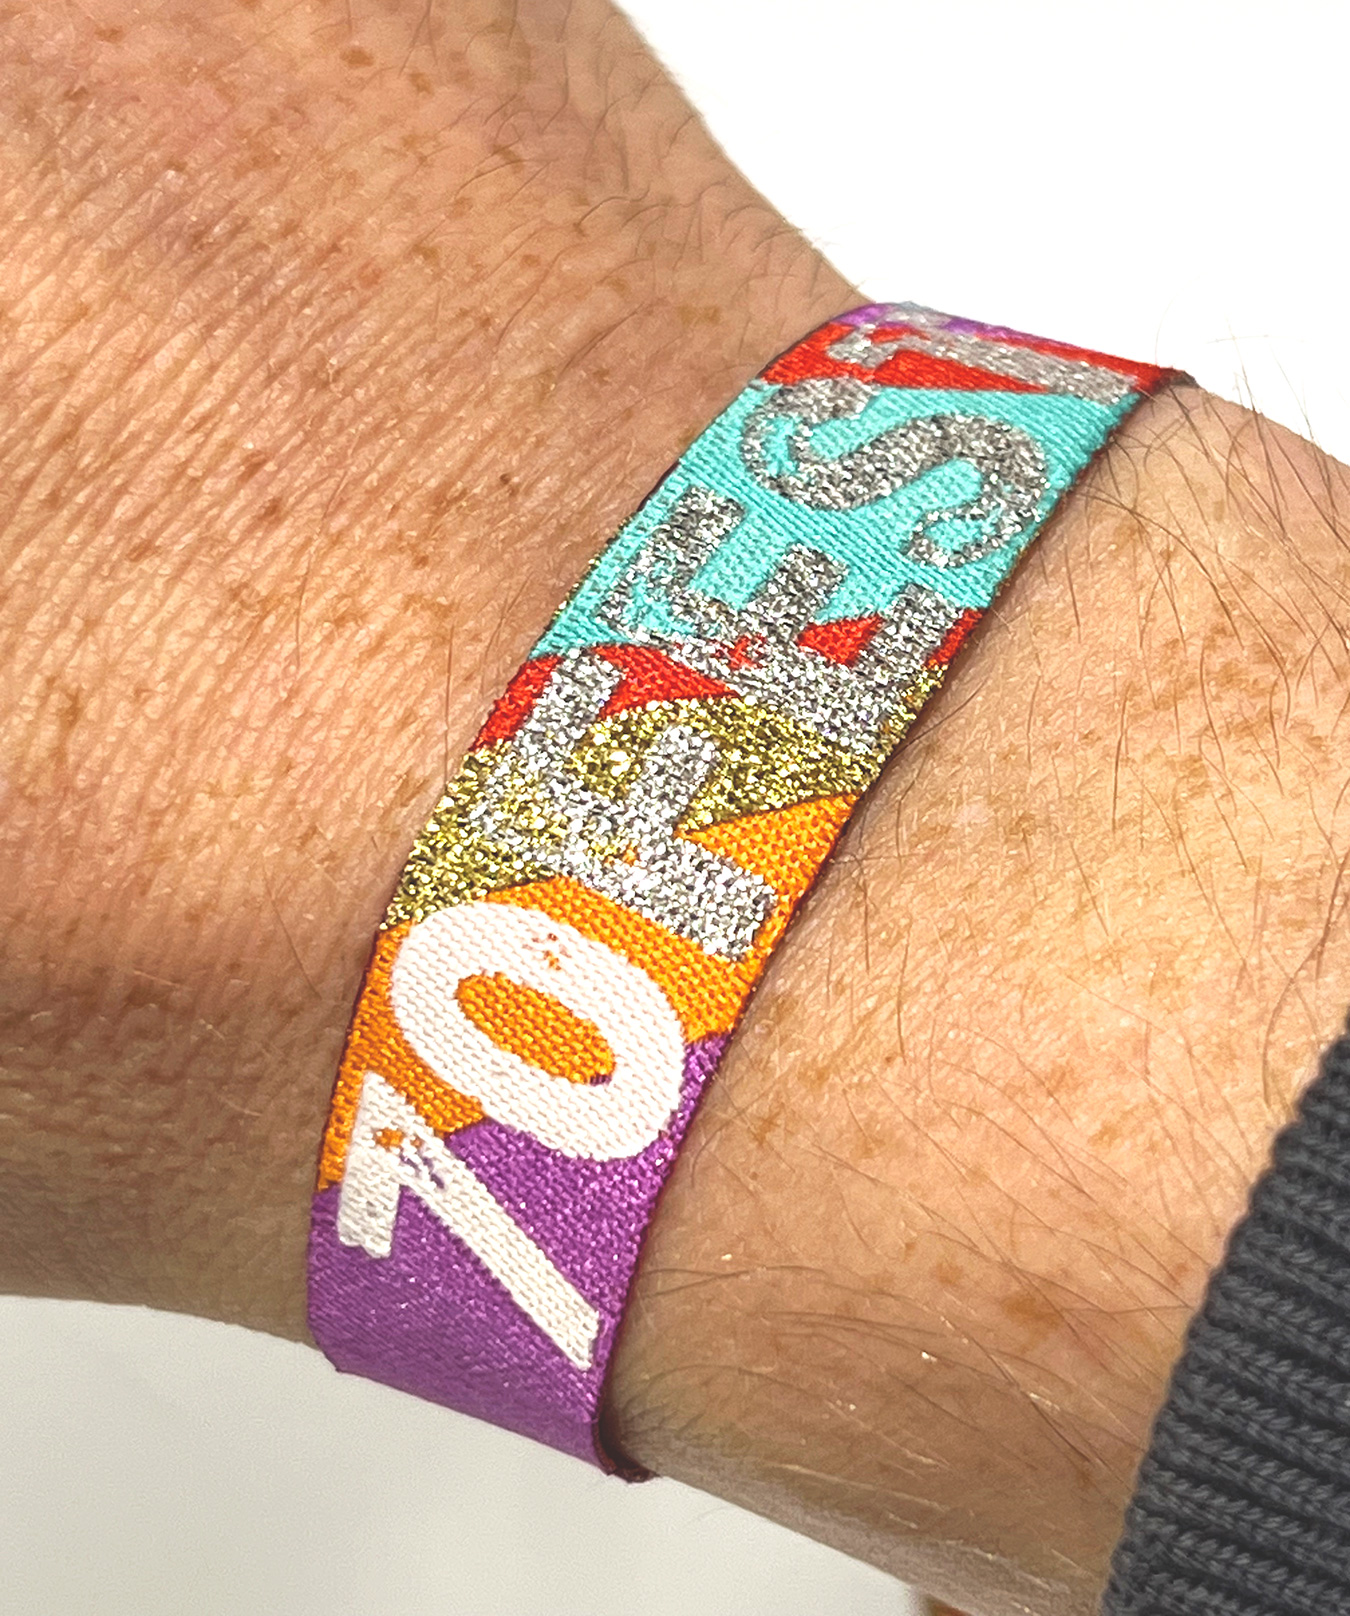 70FEST 70th birthday party festival wristbands favours